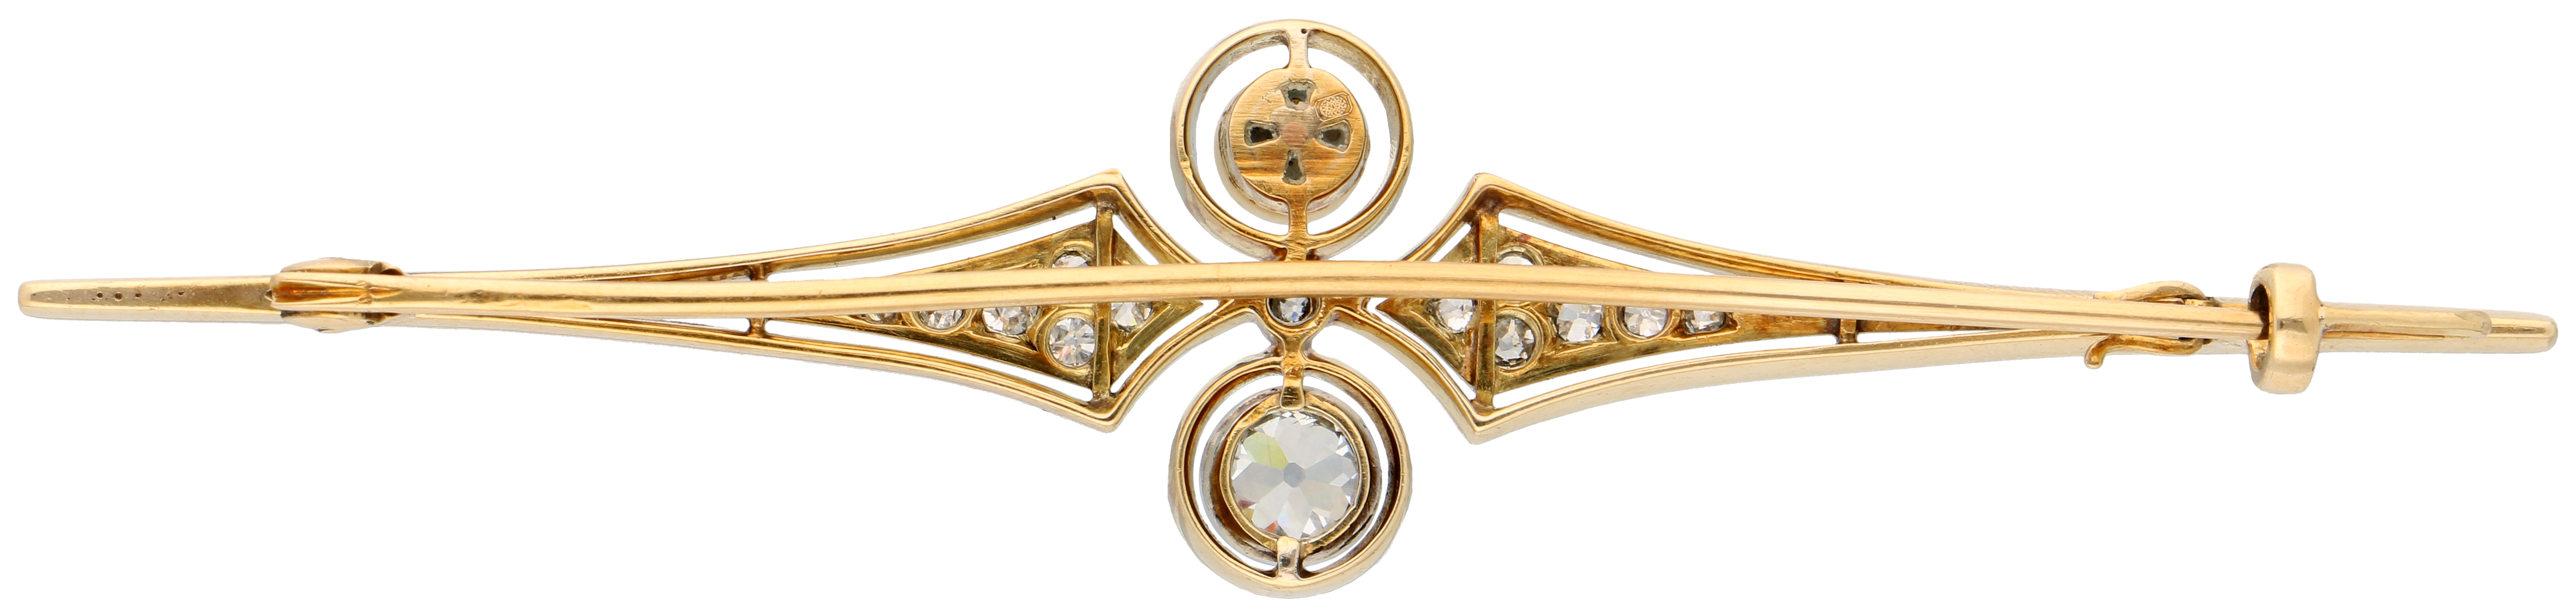 No Reserve - 14K Bicolor gold Art Deco bar brooch set with approx. 0.60 ct. diamond and cultivé pear - Image 3 of 3